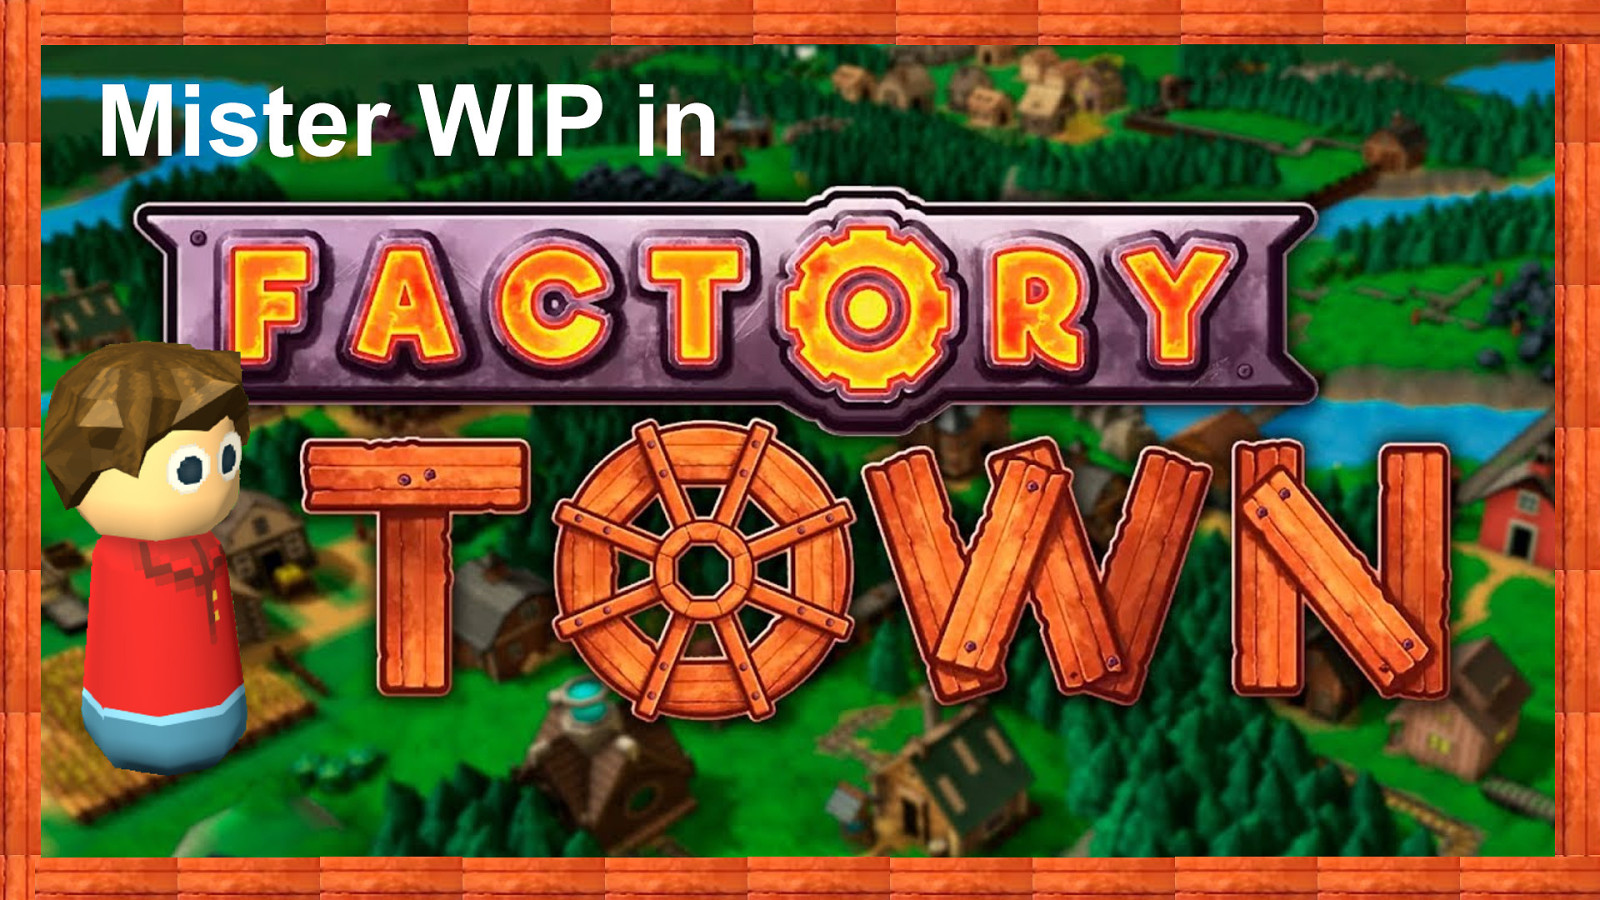 Mister WIP in Factory Town